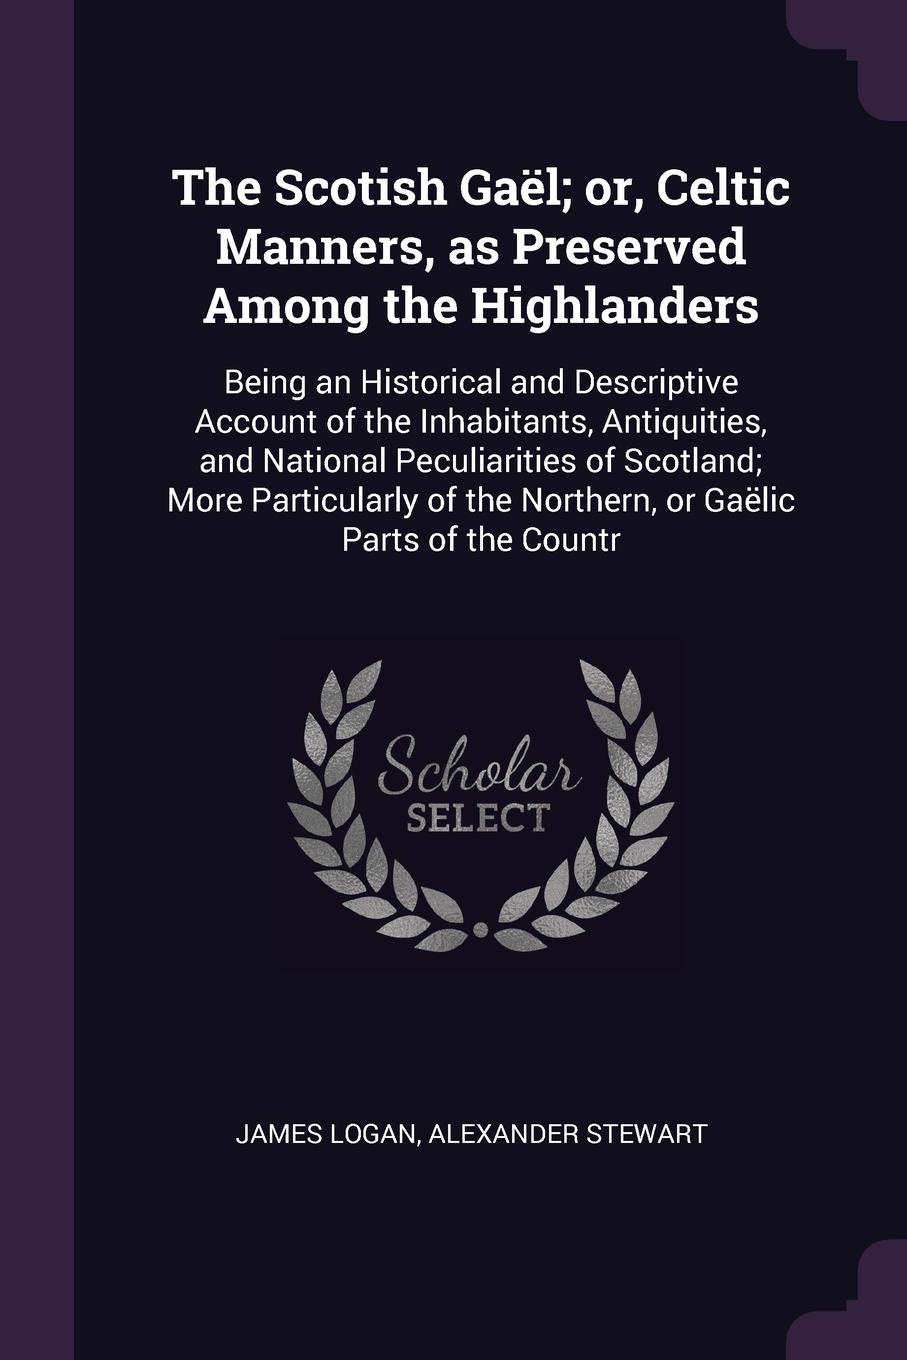 The Scotish Gael; or, Celtic Manners, as Preserved Among the Highlanders. Being an Historical and Descriptive Account of the Inhabitants, Antiquities, and National Peculiarities of Scotland; More Particularly of the Northern, or Gaelic Parts of th...